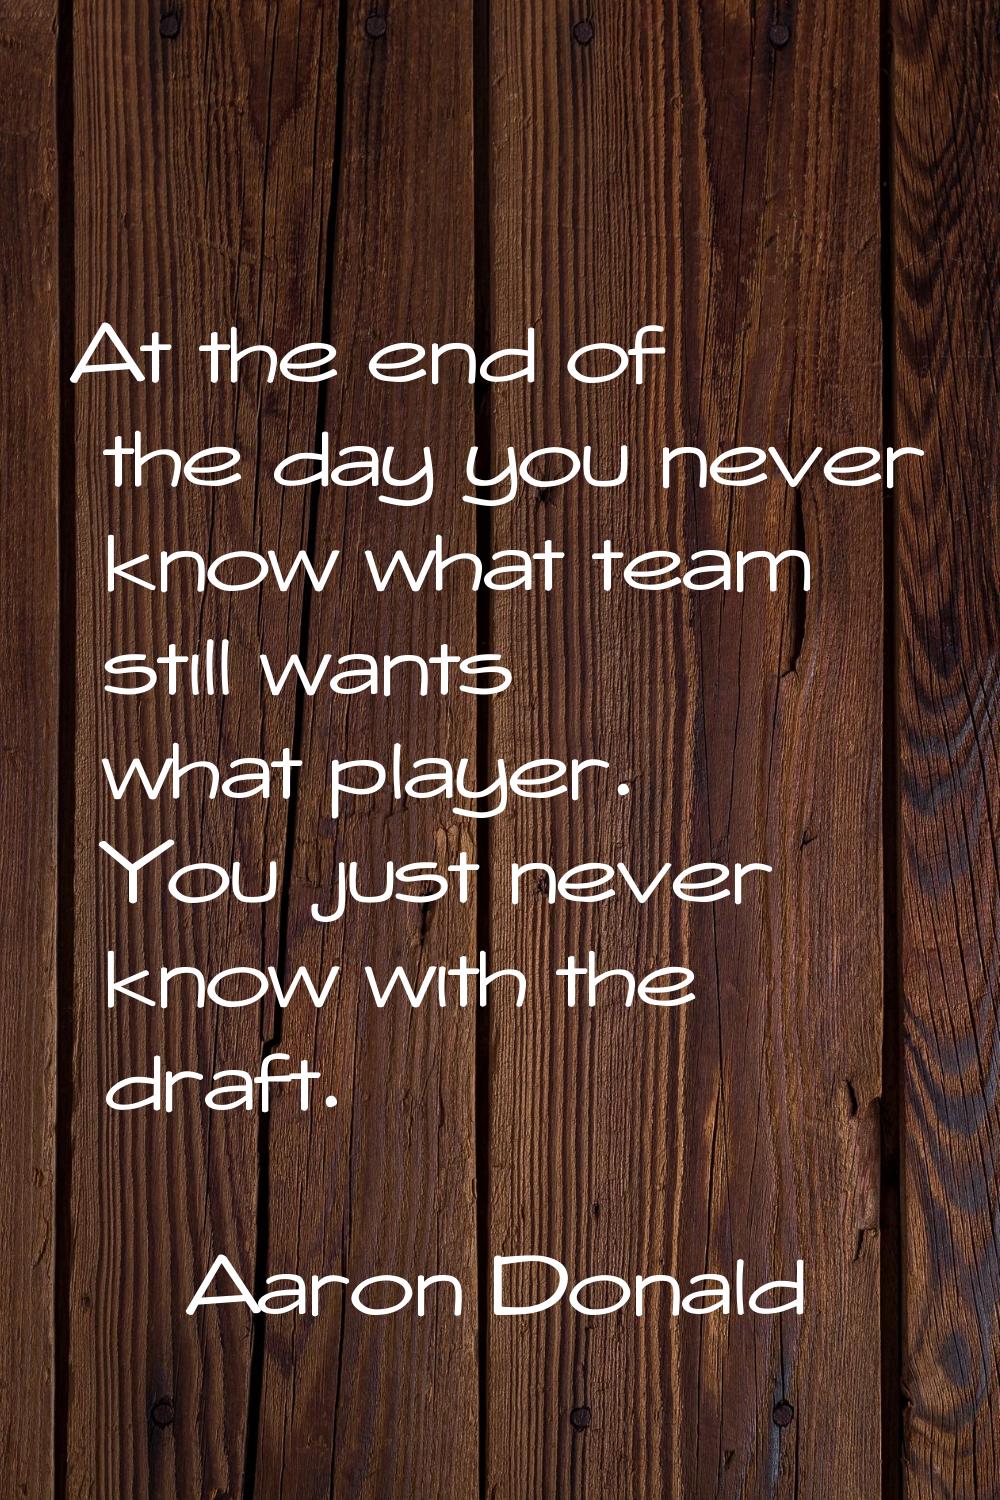 At the end of the day you never know what team still wants what player. You just never know with th